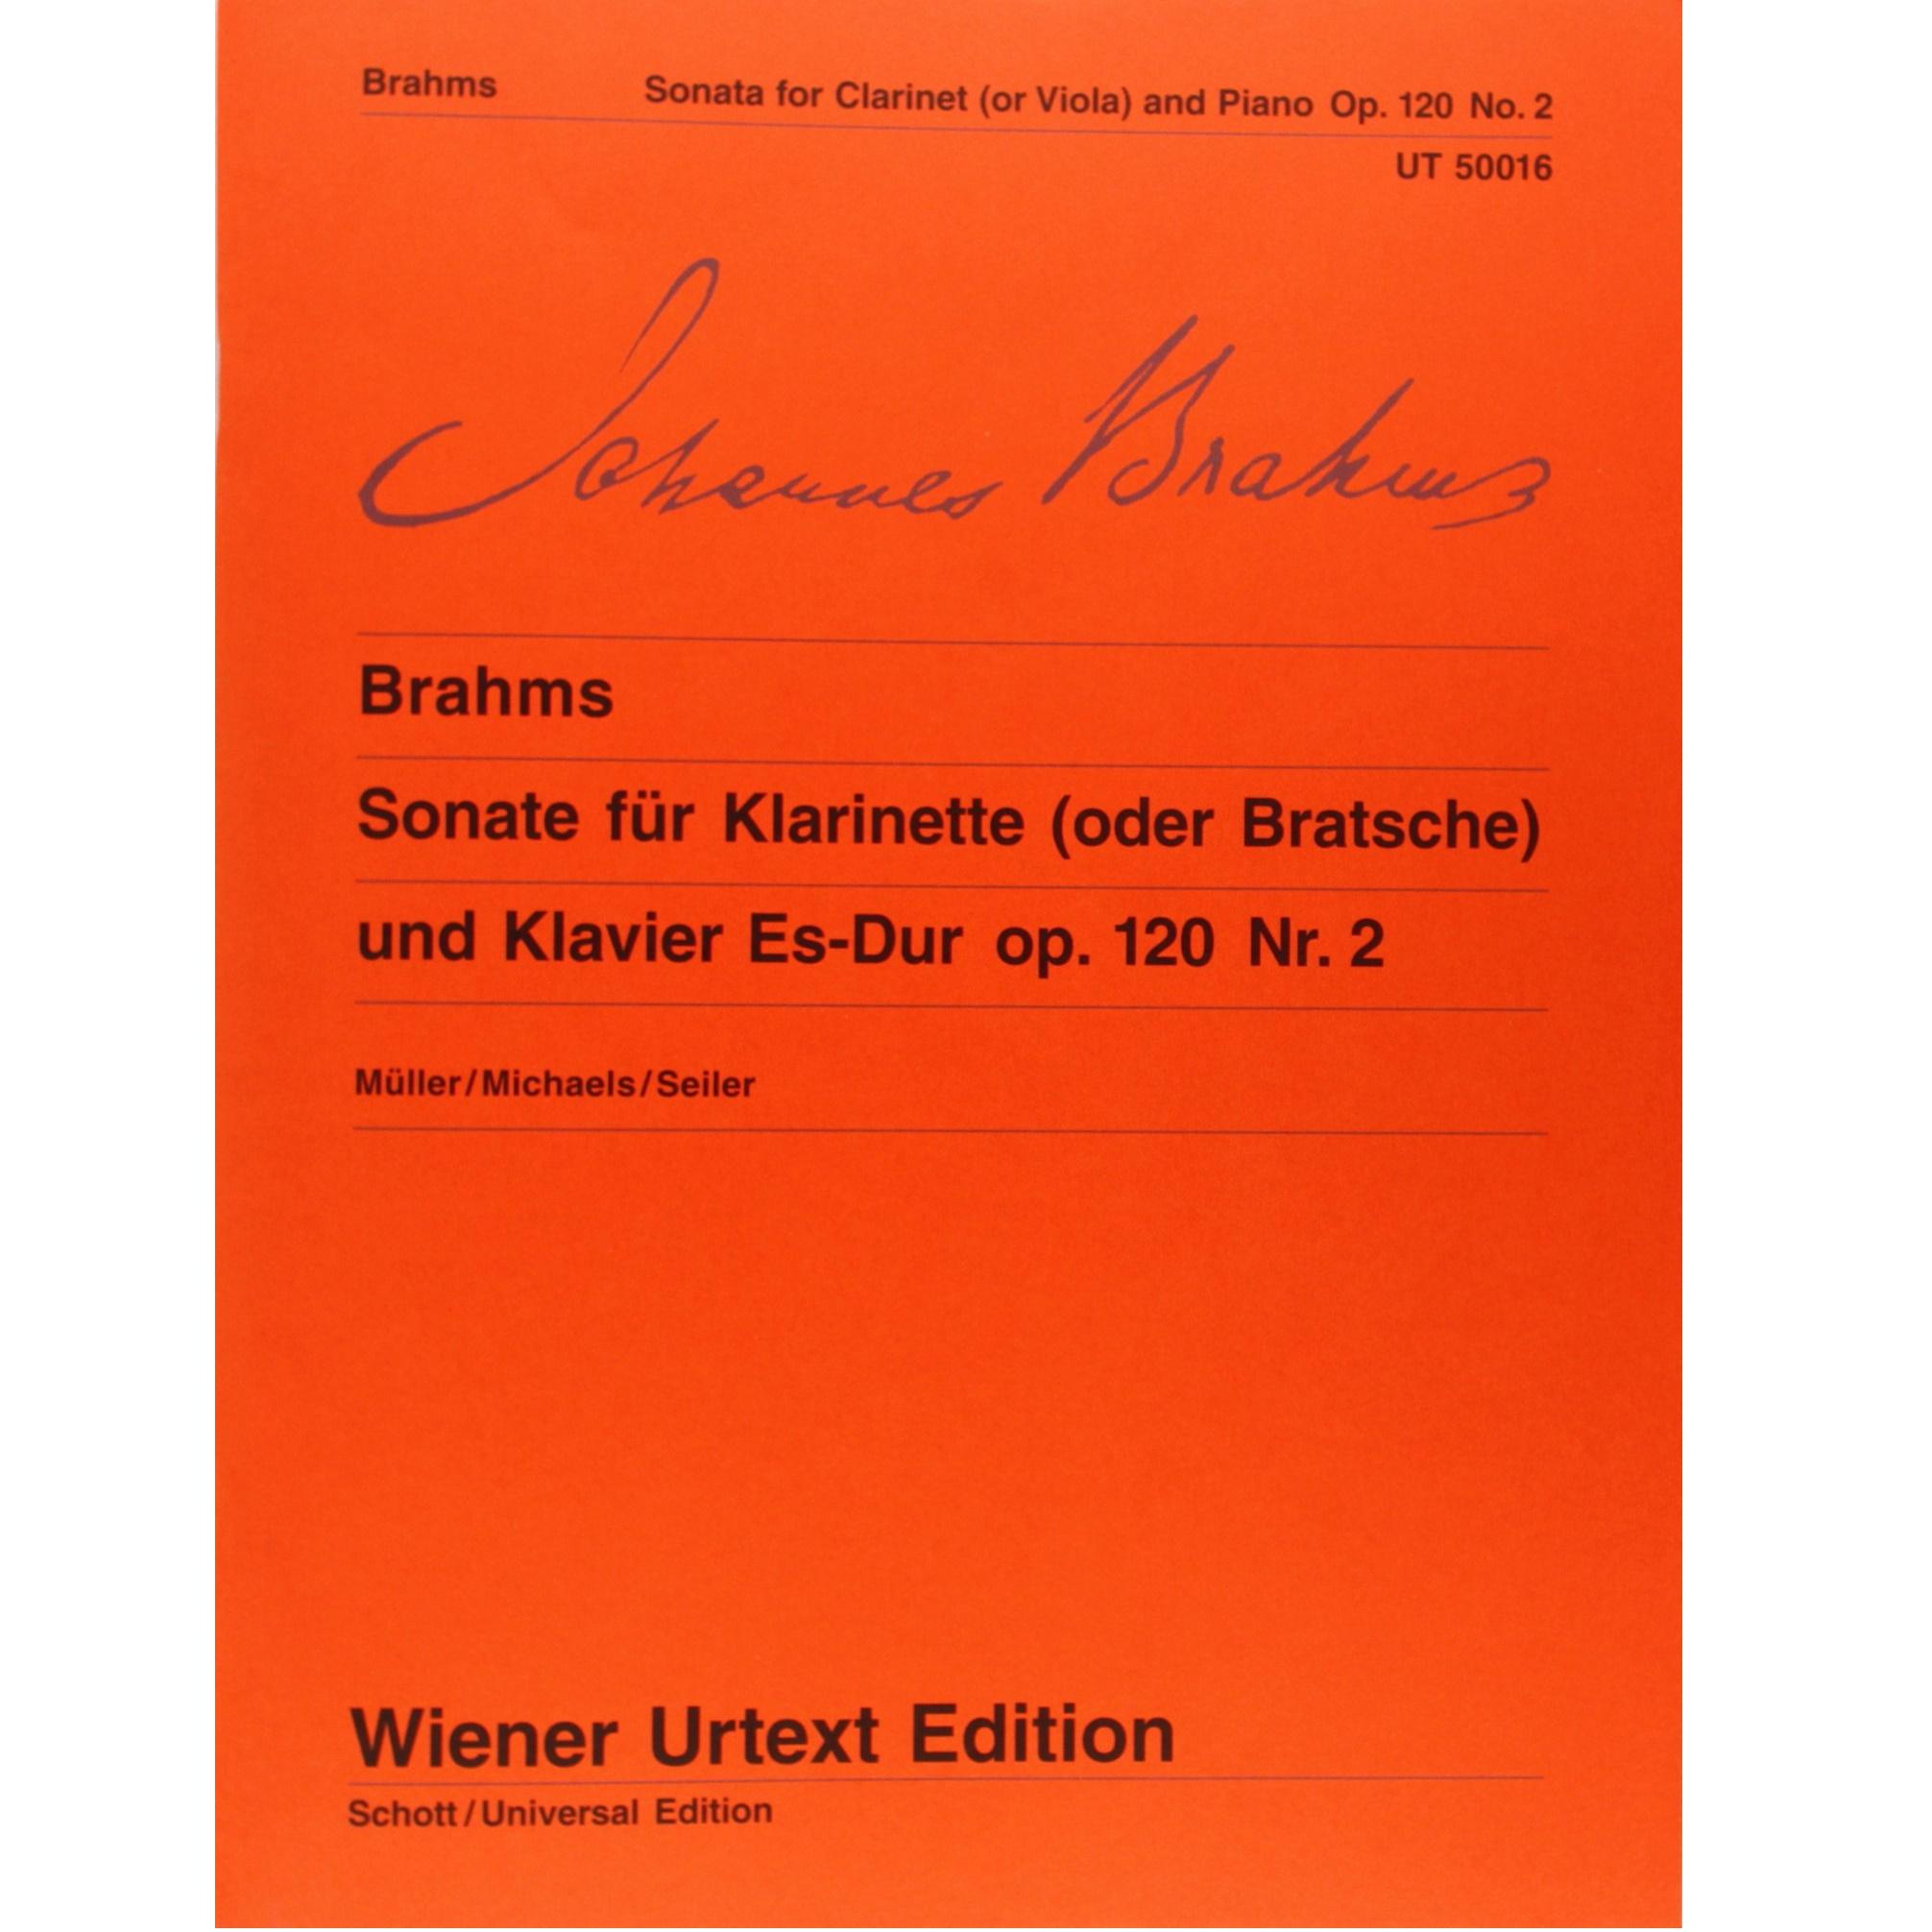 Brahms Sonata for Clarinet and Piano Op. 120 No. 2 - Wiener Urtext Edition